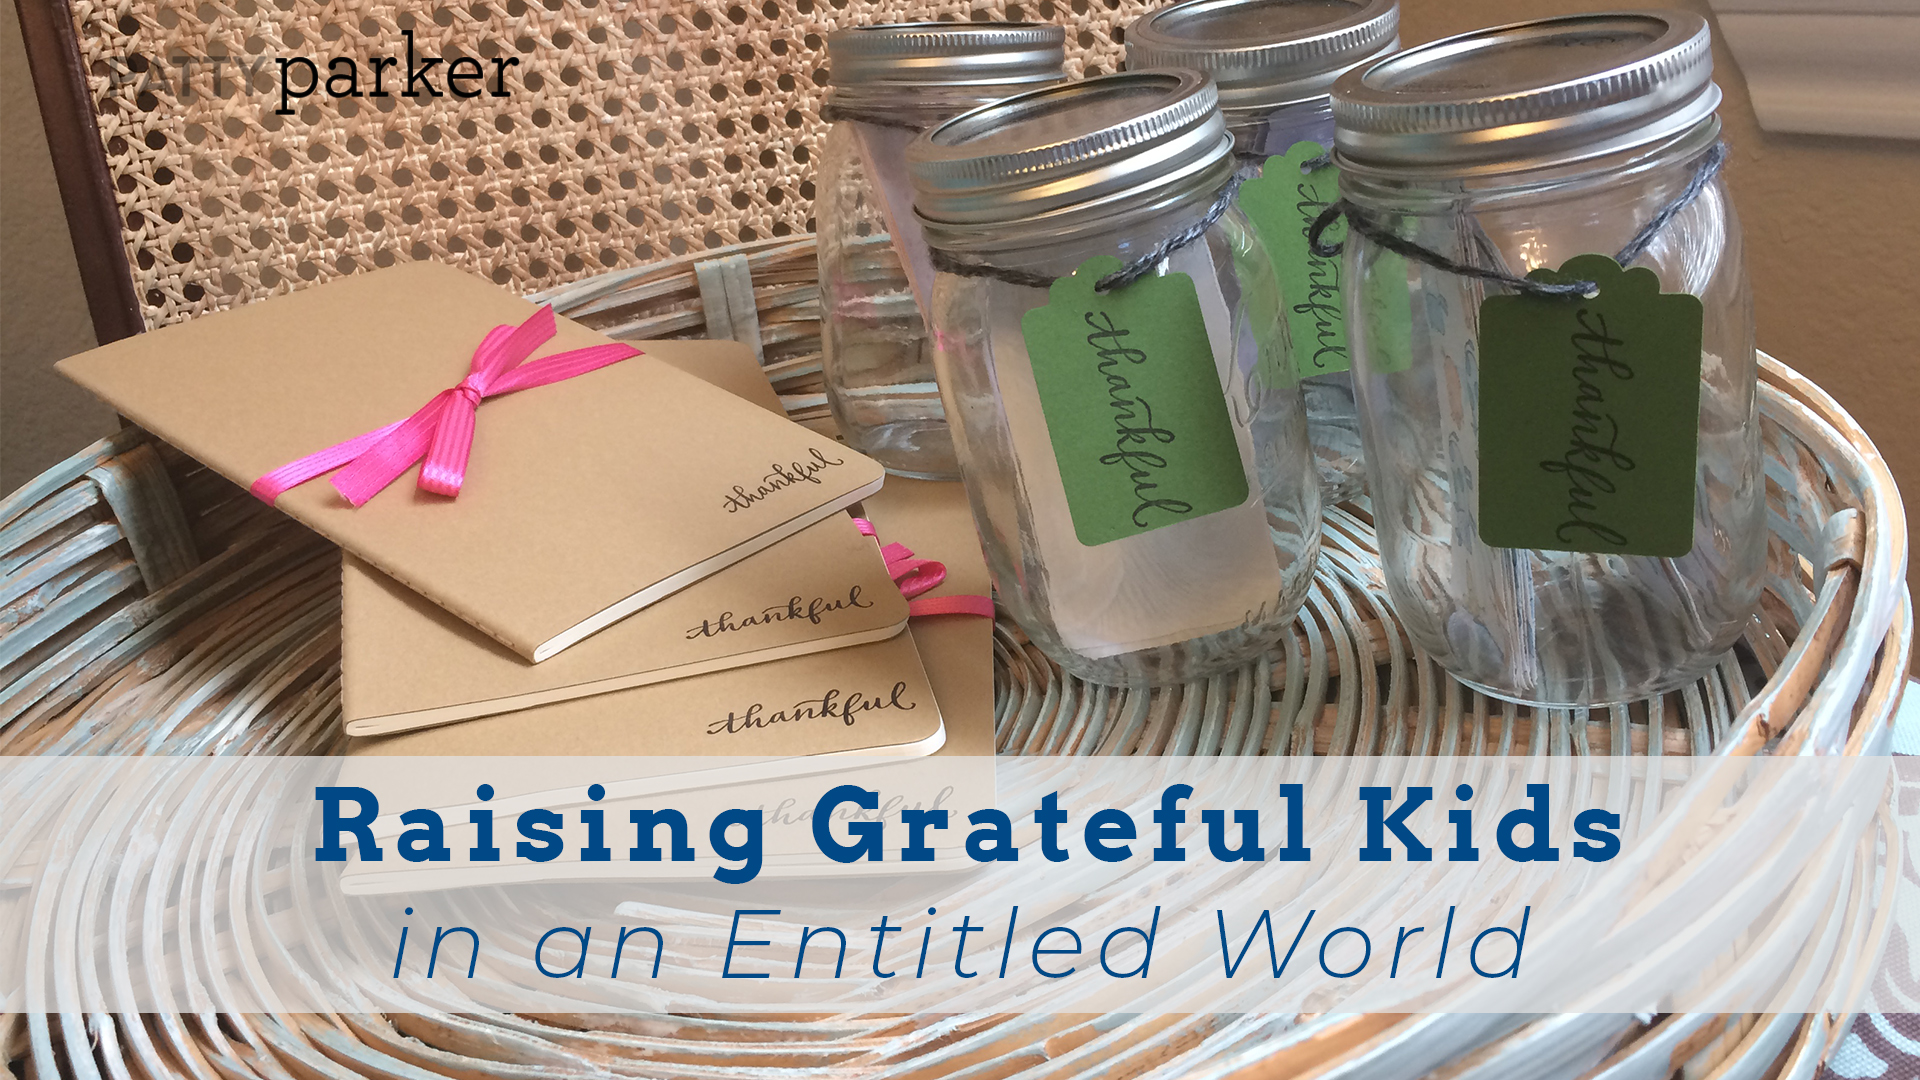 In a world that is blaring a “never enough” message, how do we nurture our children to be grateful for what they have and better yet have a heart to serve others and give their life away? The book, Raising Grateful Kids offers hope.